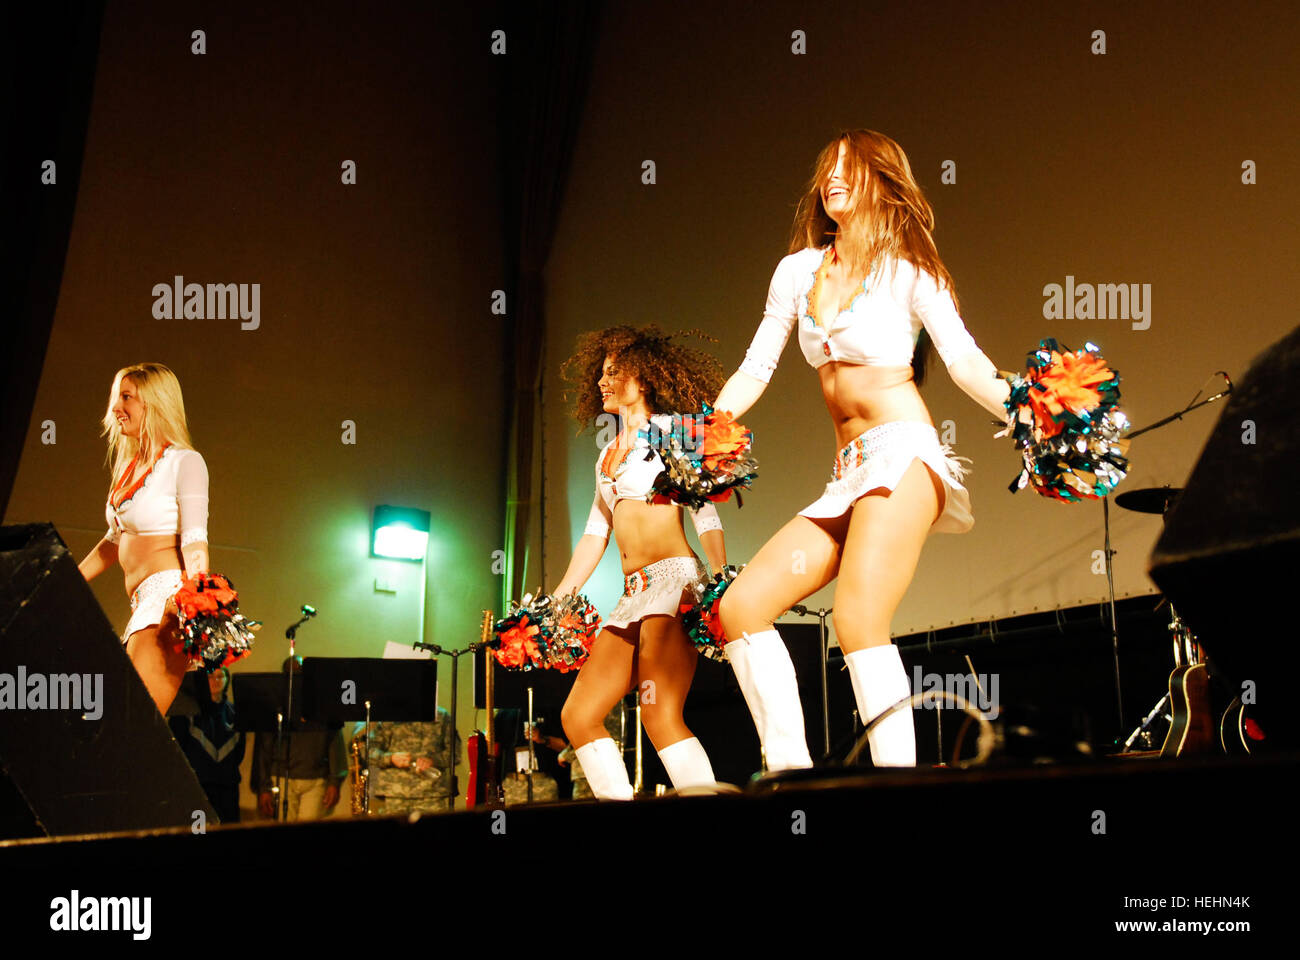 Miami Dolphin Cheerleaders Ariana Aubert, Kayla Patterson and Lilly Robbins performing at the Sgt. Maj. of the Army's Hope and Freedom Tour at Joint Base Balad, Iraq on Dec. 21. Dolphins Cheerleaders Balad Stock Photo